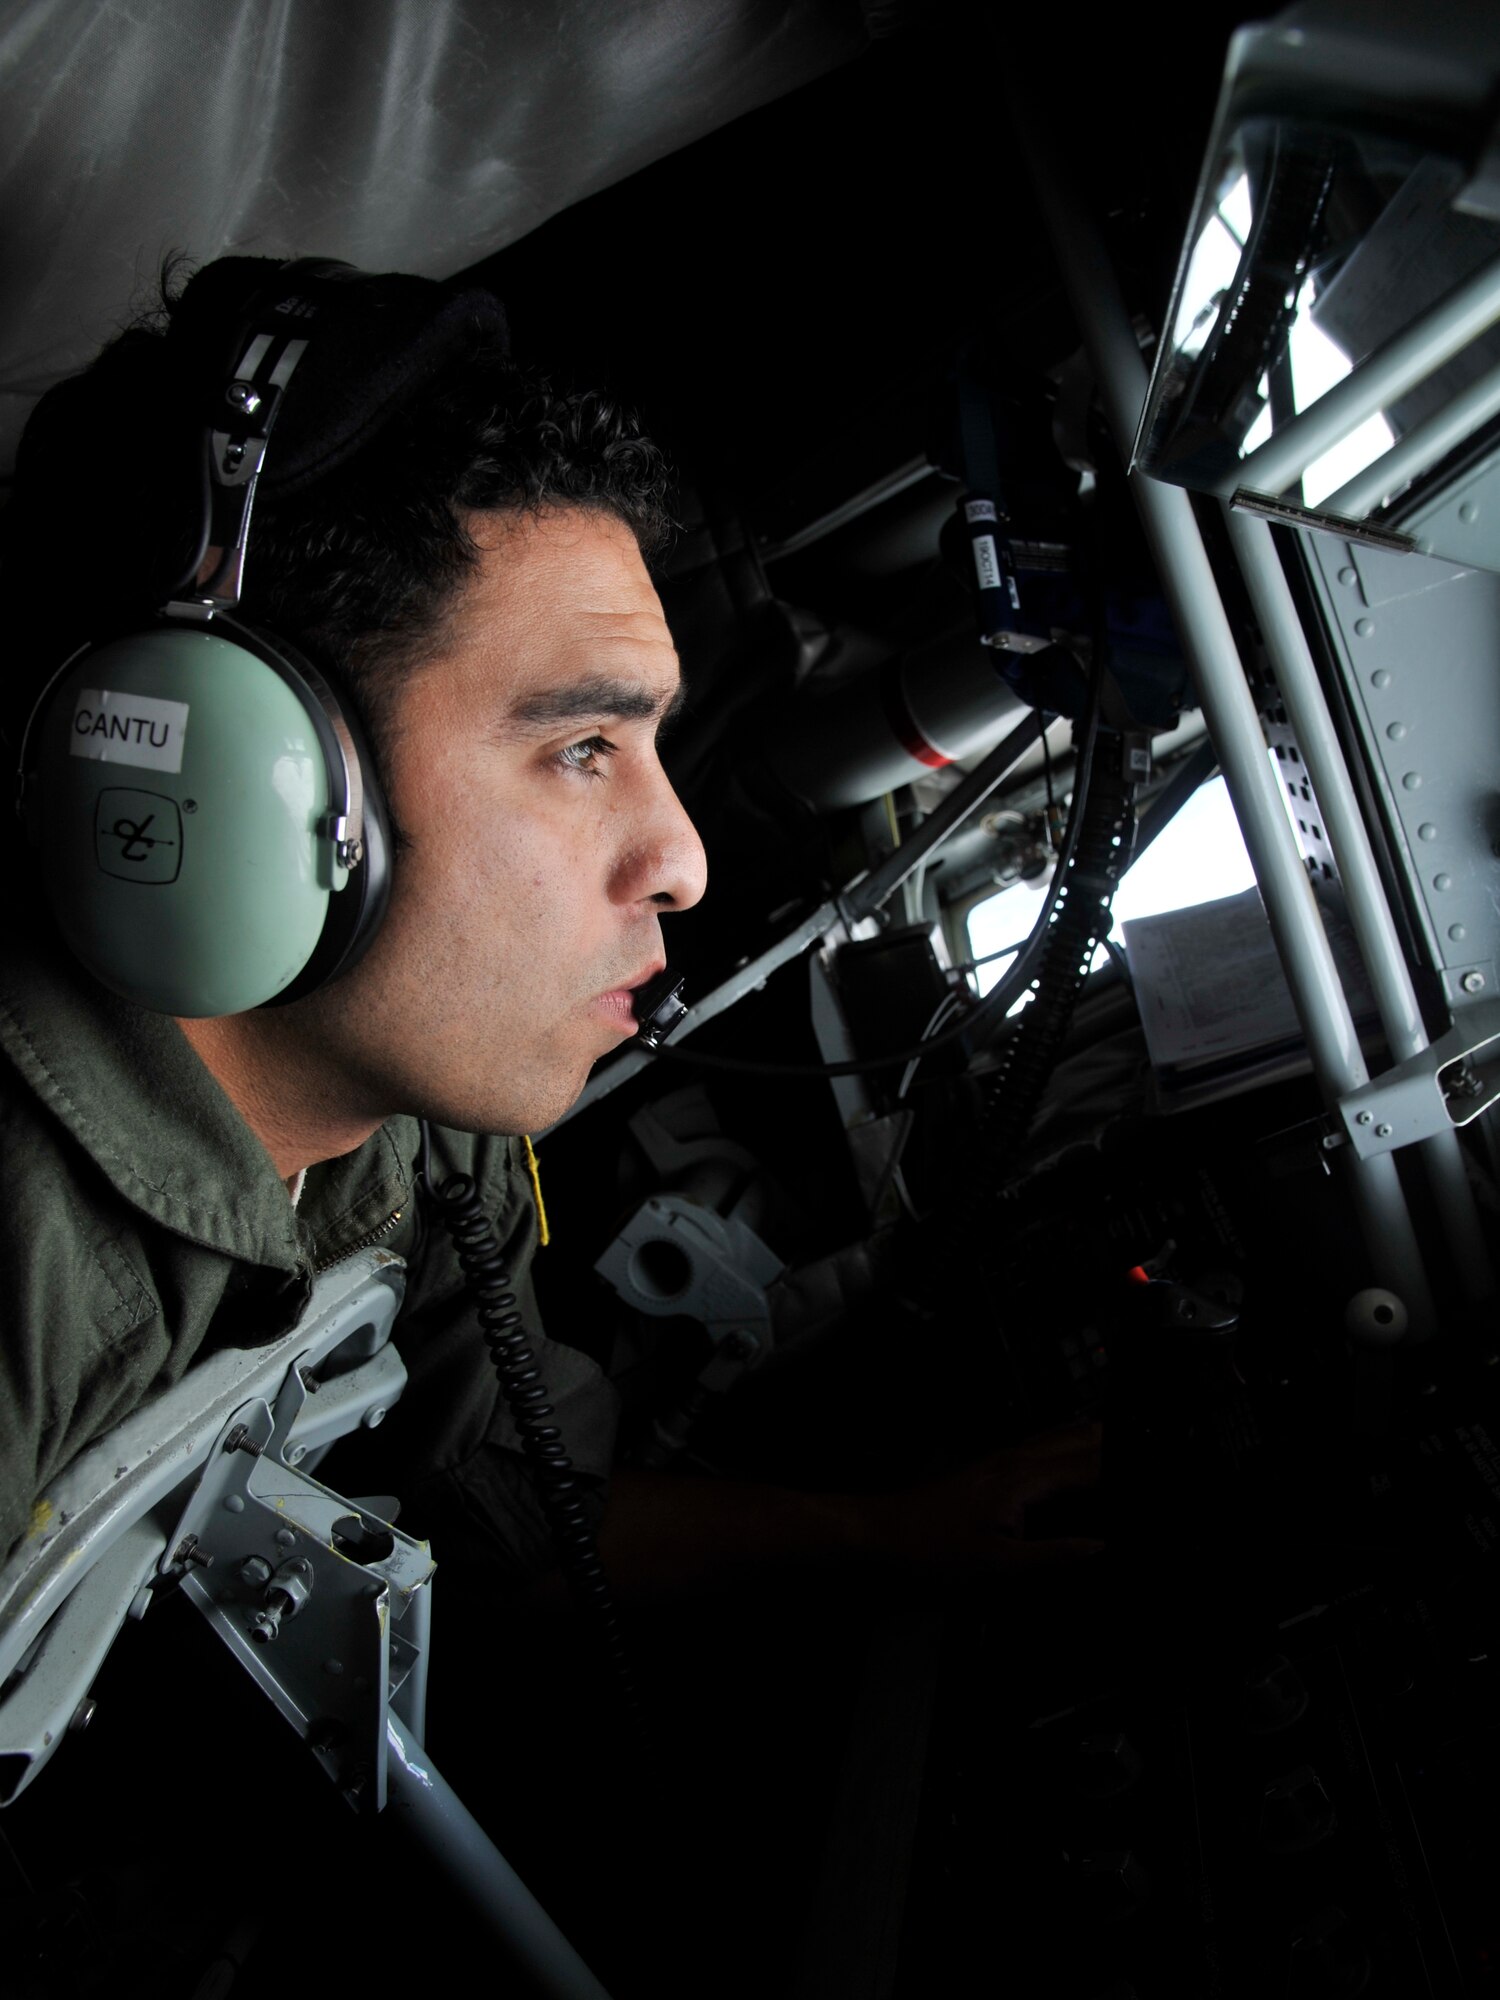 Staff Sgt. Steven Cantu prepares to refuel a B-1B Lancer assigned to Ellsworth Air Force Base, South Dakota, Sept. 23, 2014. Two B-1Bs were refueled by a KC-135 Stratotanker from Fairchild AFB, Washington, during a routine training mission over South Dakota. Nearly all internal fuel can be pumped through the flying boom, the KC-135's primary fuel transfer method. Cantu, a 92nd Air Refueling Squadron boom operator, is stationed in the rear of the plane and controls the boom during in-flight aerial refueling. (U.S. Air Force photo by Senior Airman Mary O'Dell/Released)